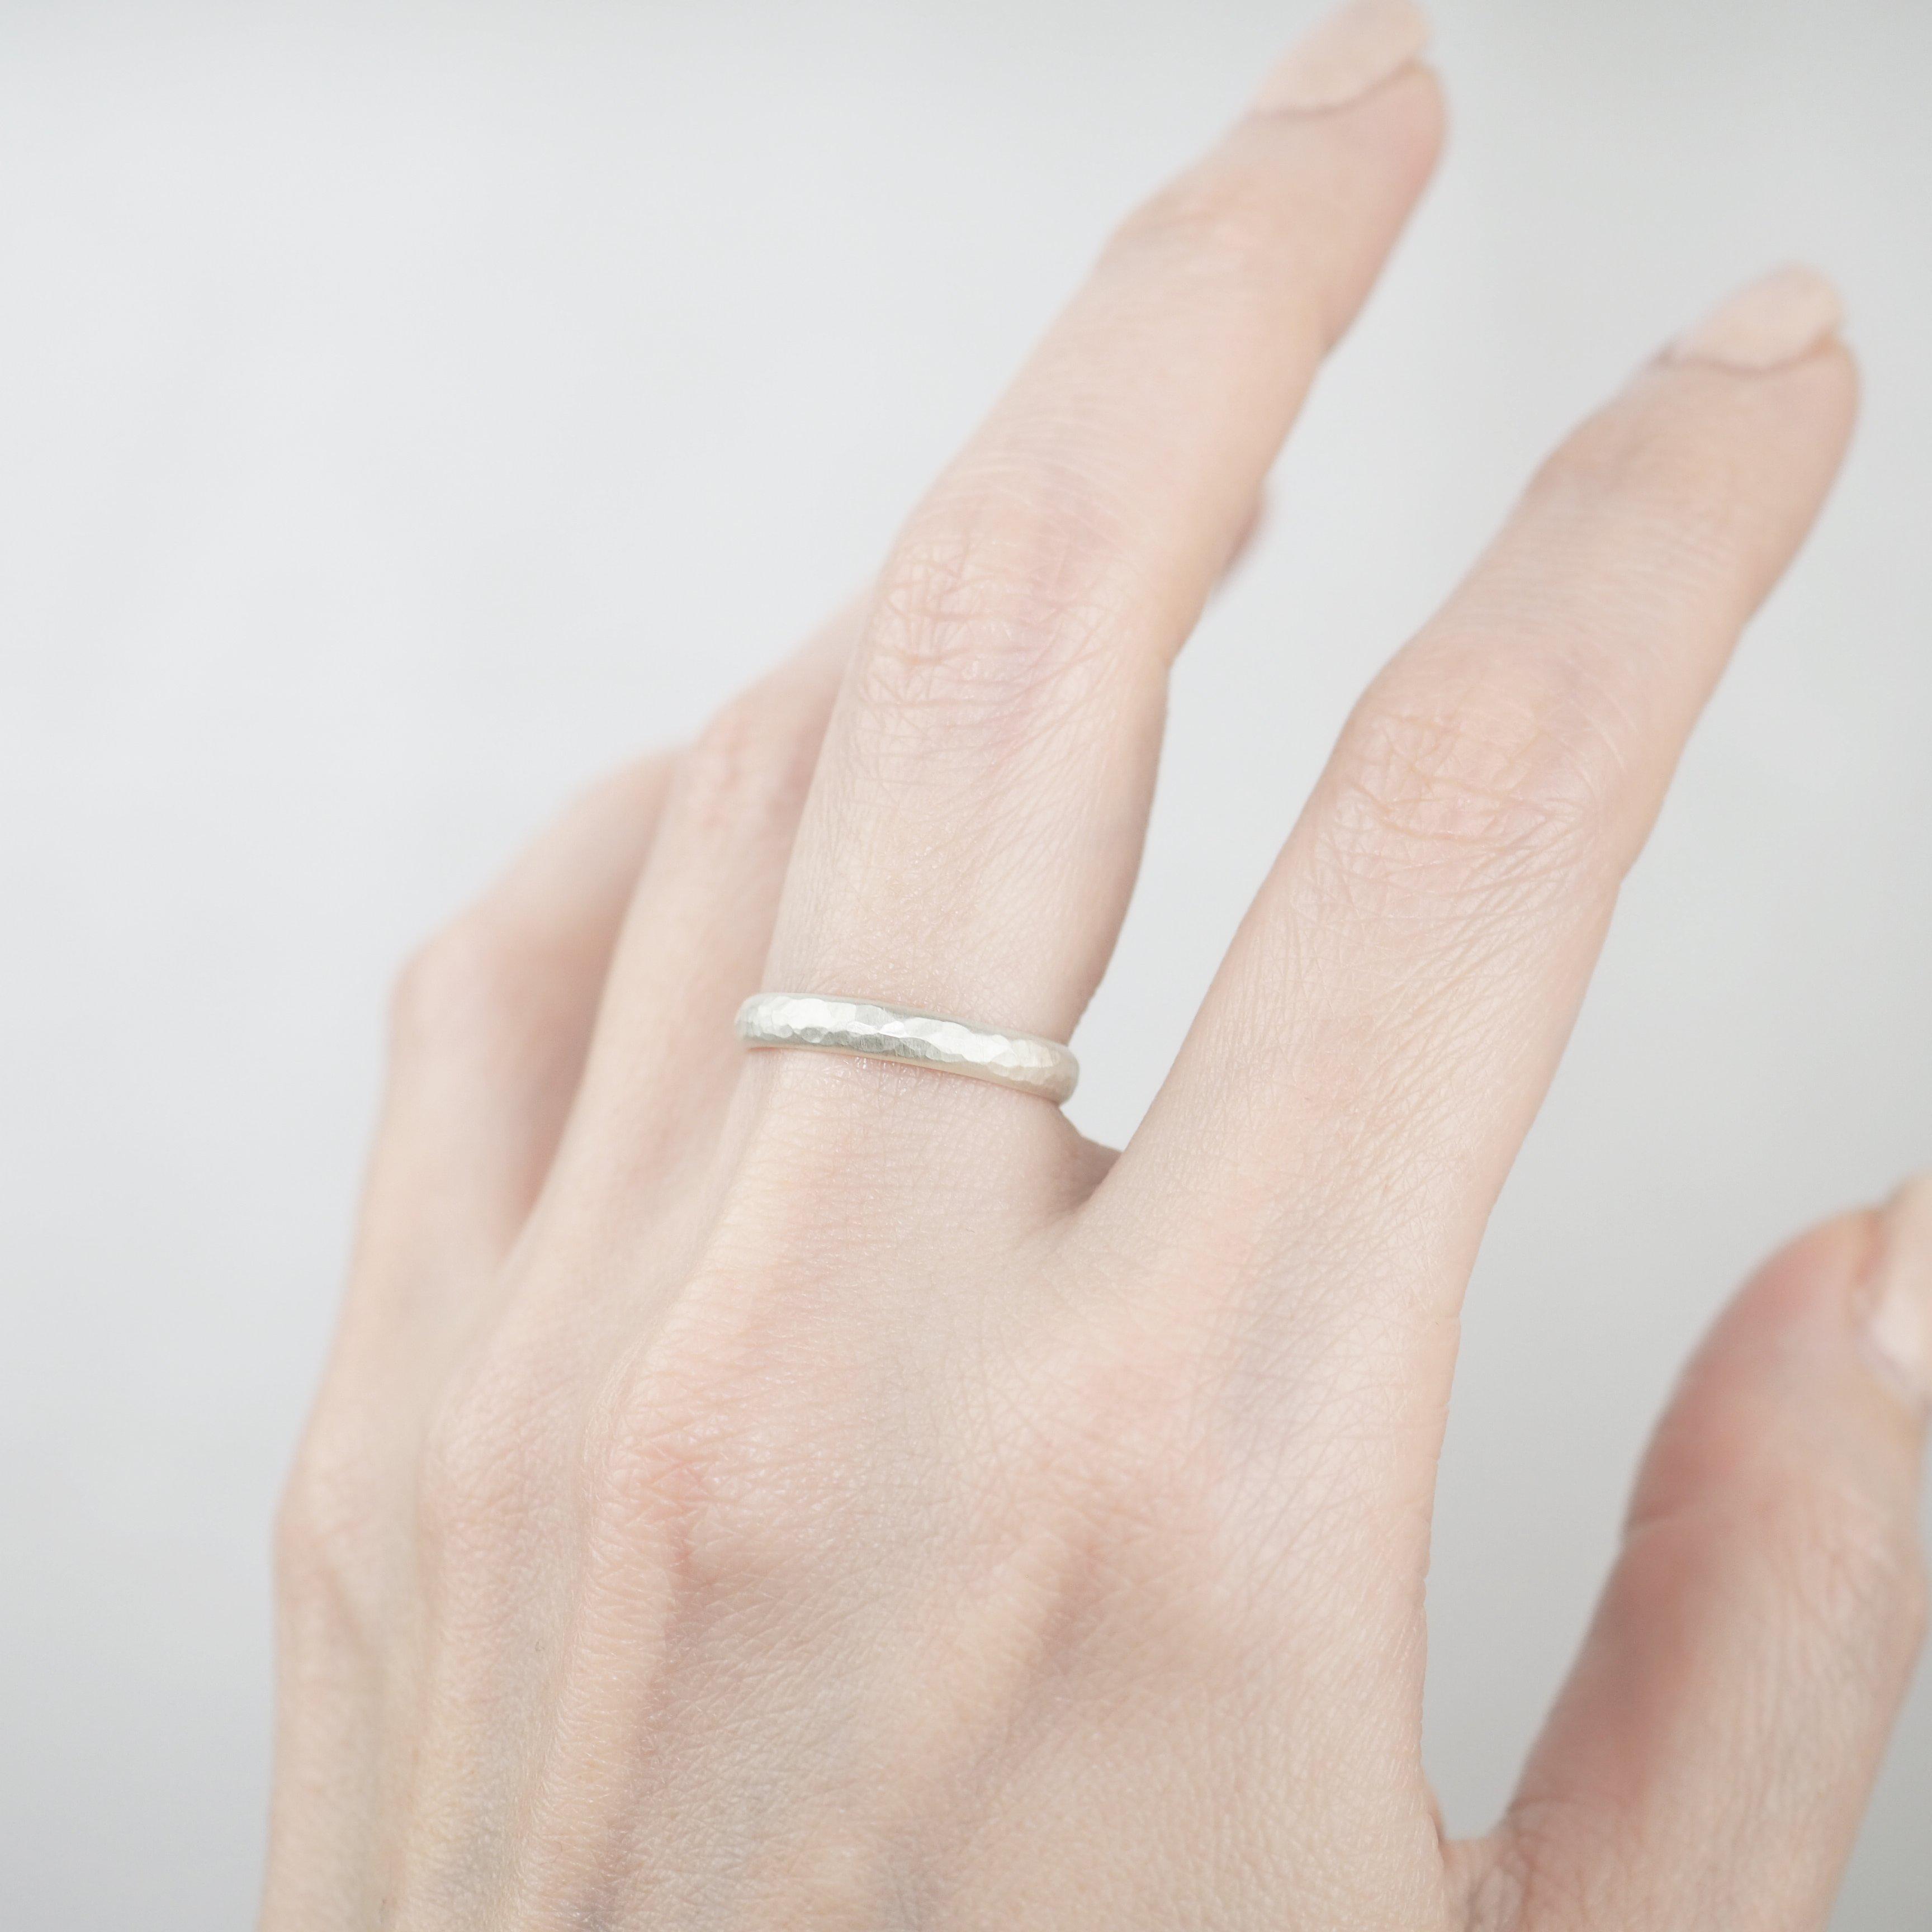 Silver Ring 